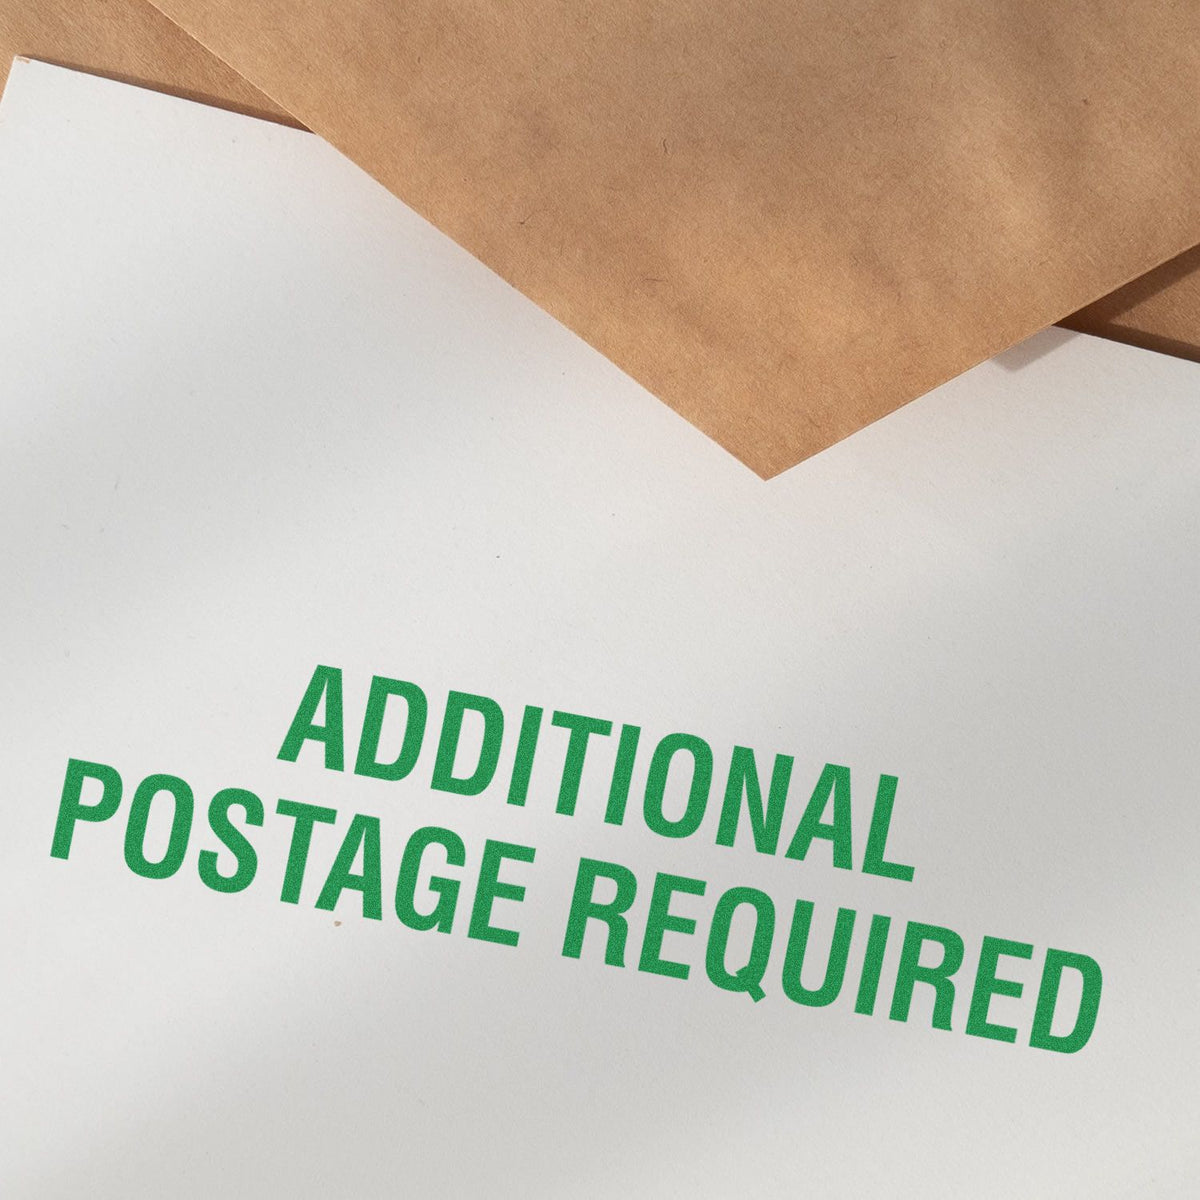 Additional Postage Required Rubber Stamp In Use